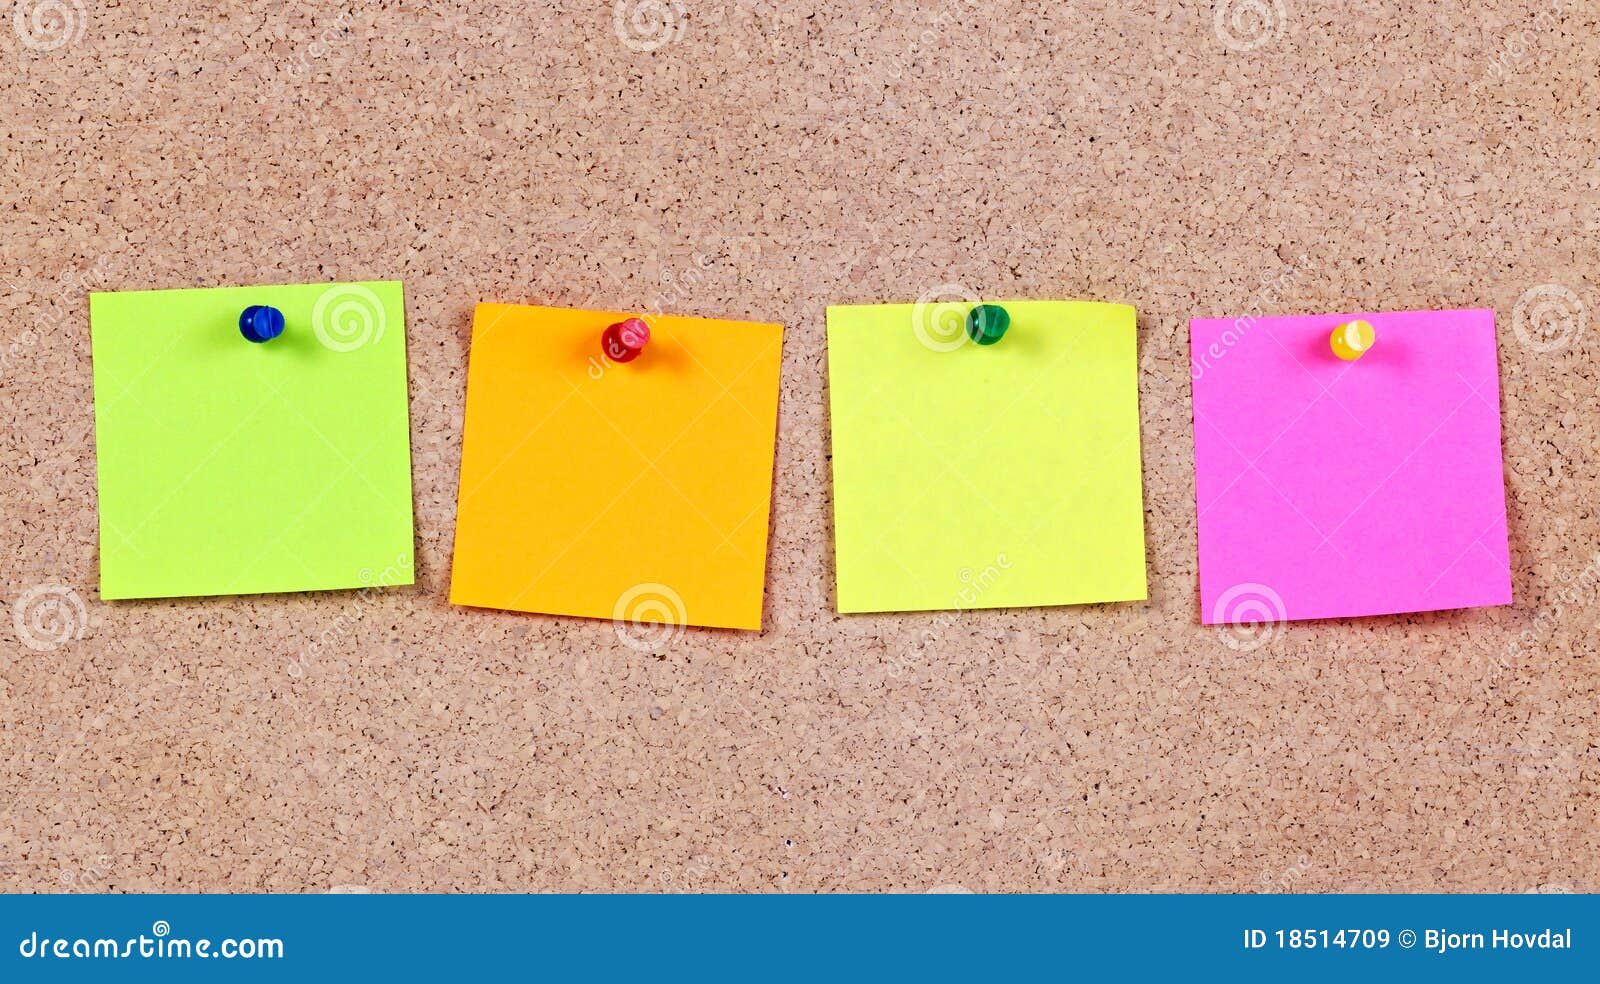 post-it notes